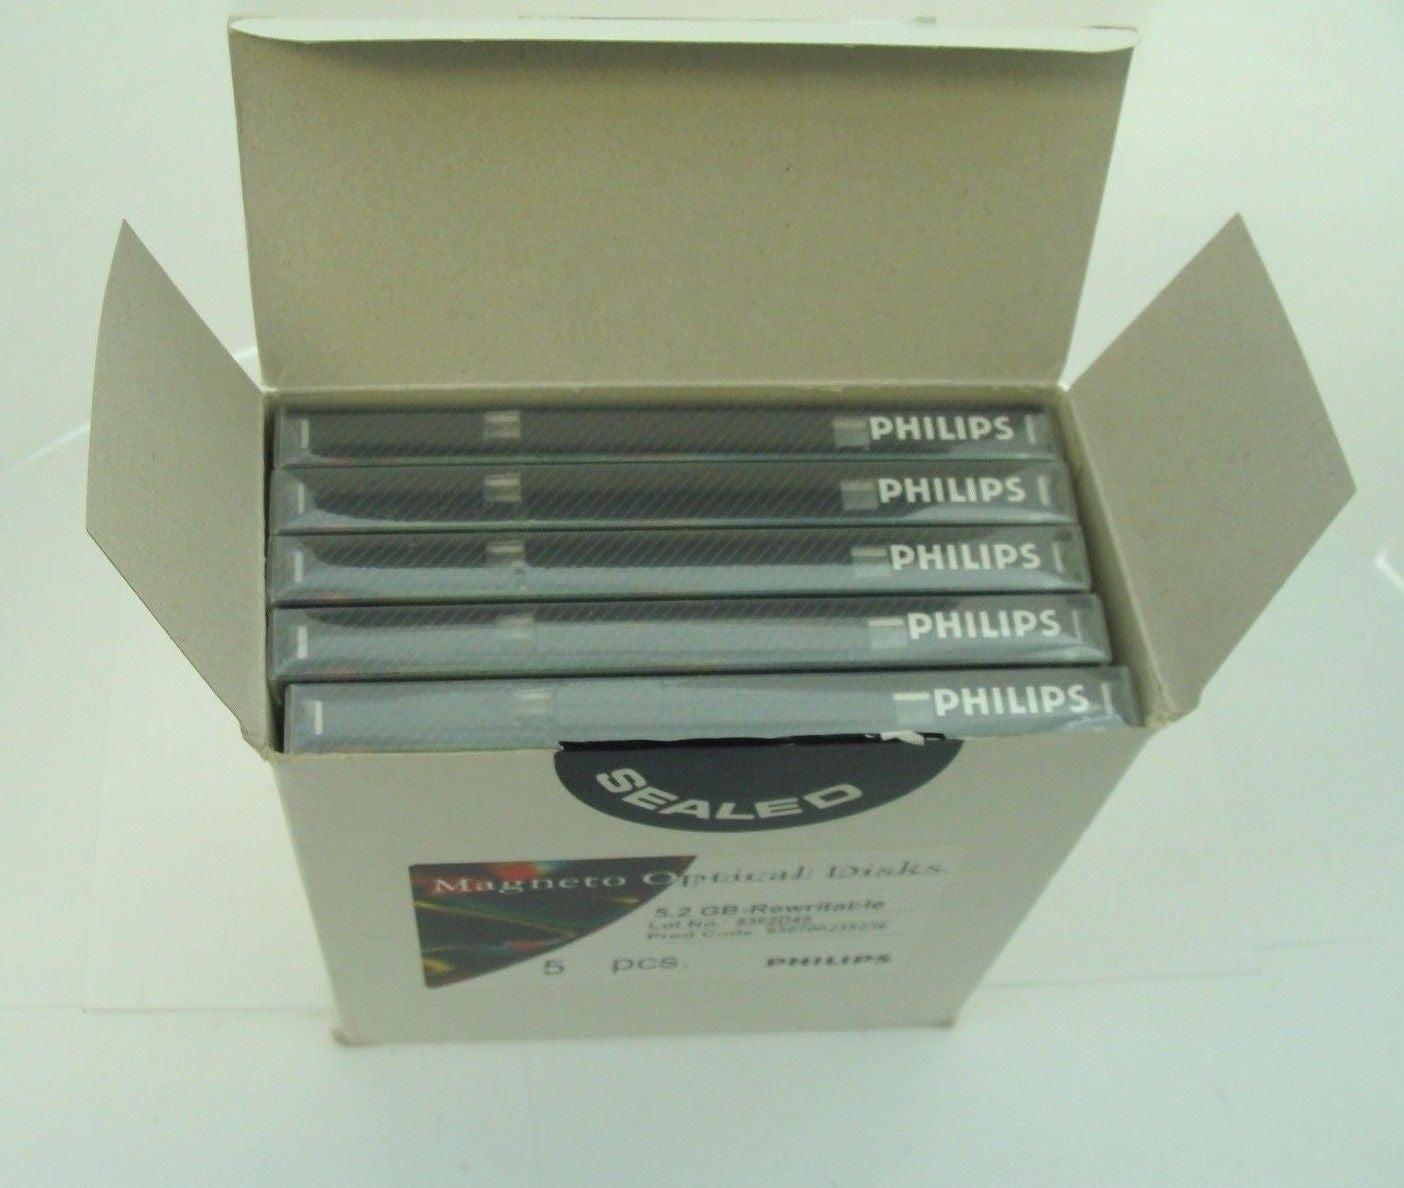 NEW 5-Pack Philips 83PDO MO 5.2GB Optical Disk RW 5.25" (Same as EDM-5200C) - Micro Technologies (yourdrives.com)